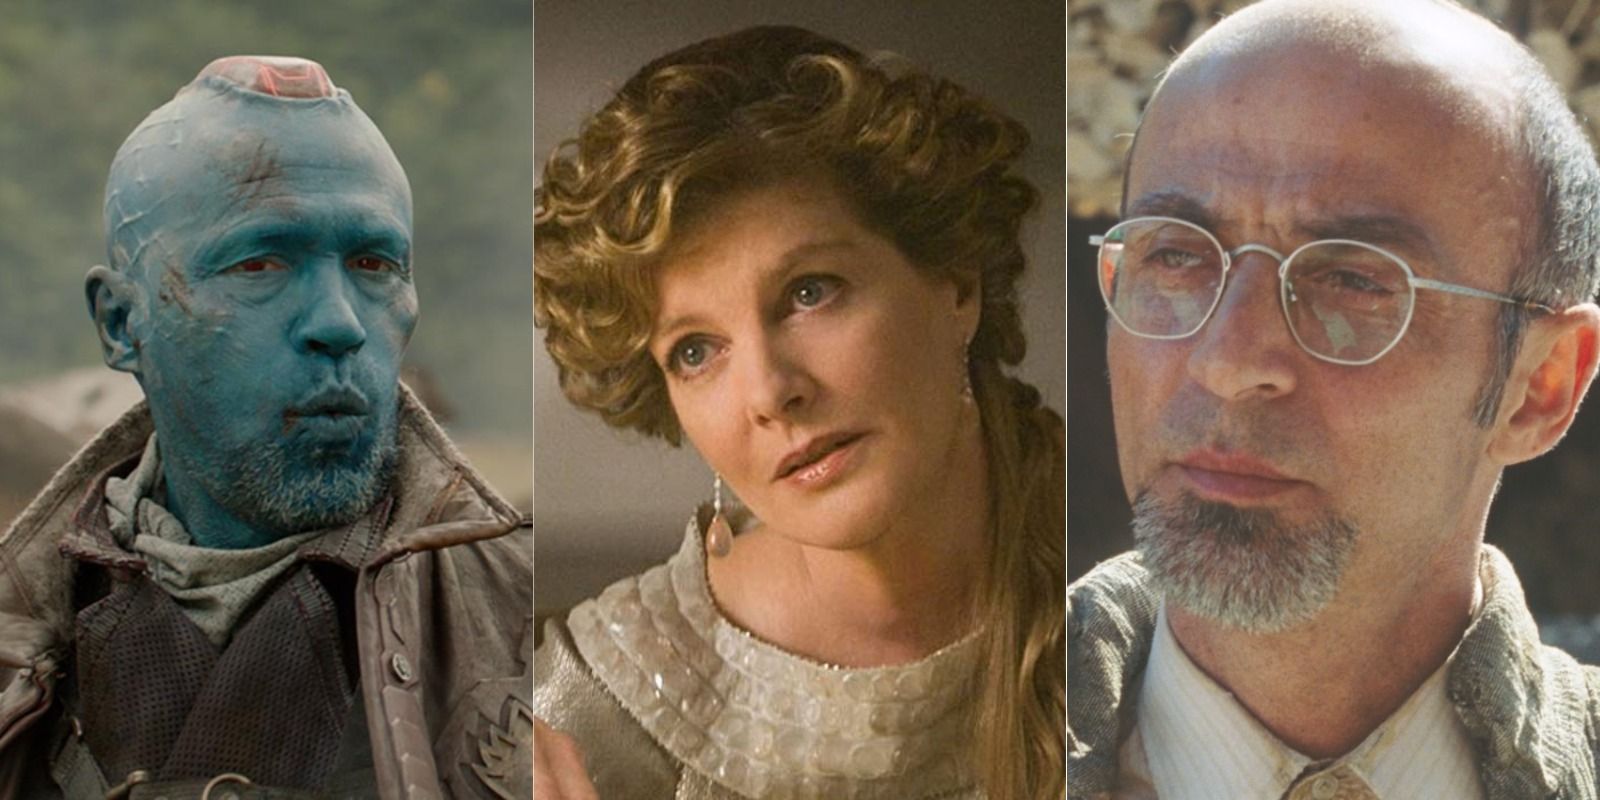 Yondu, Frigga, and Dr. Yinsen from the MCU.